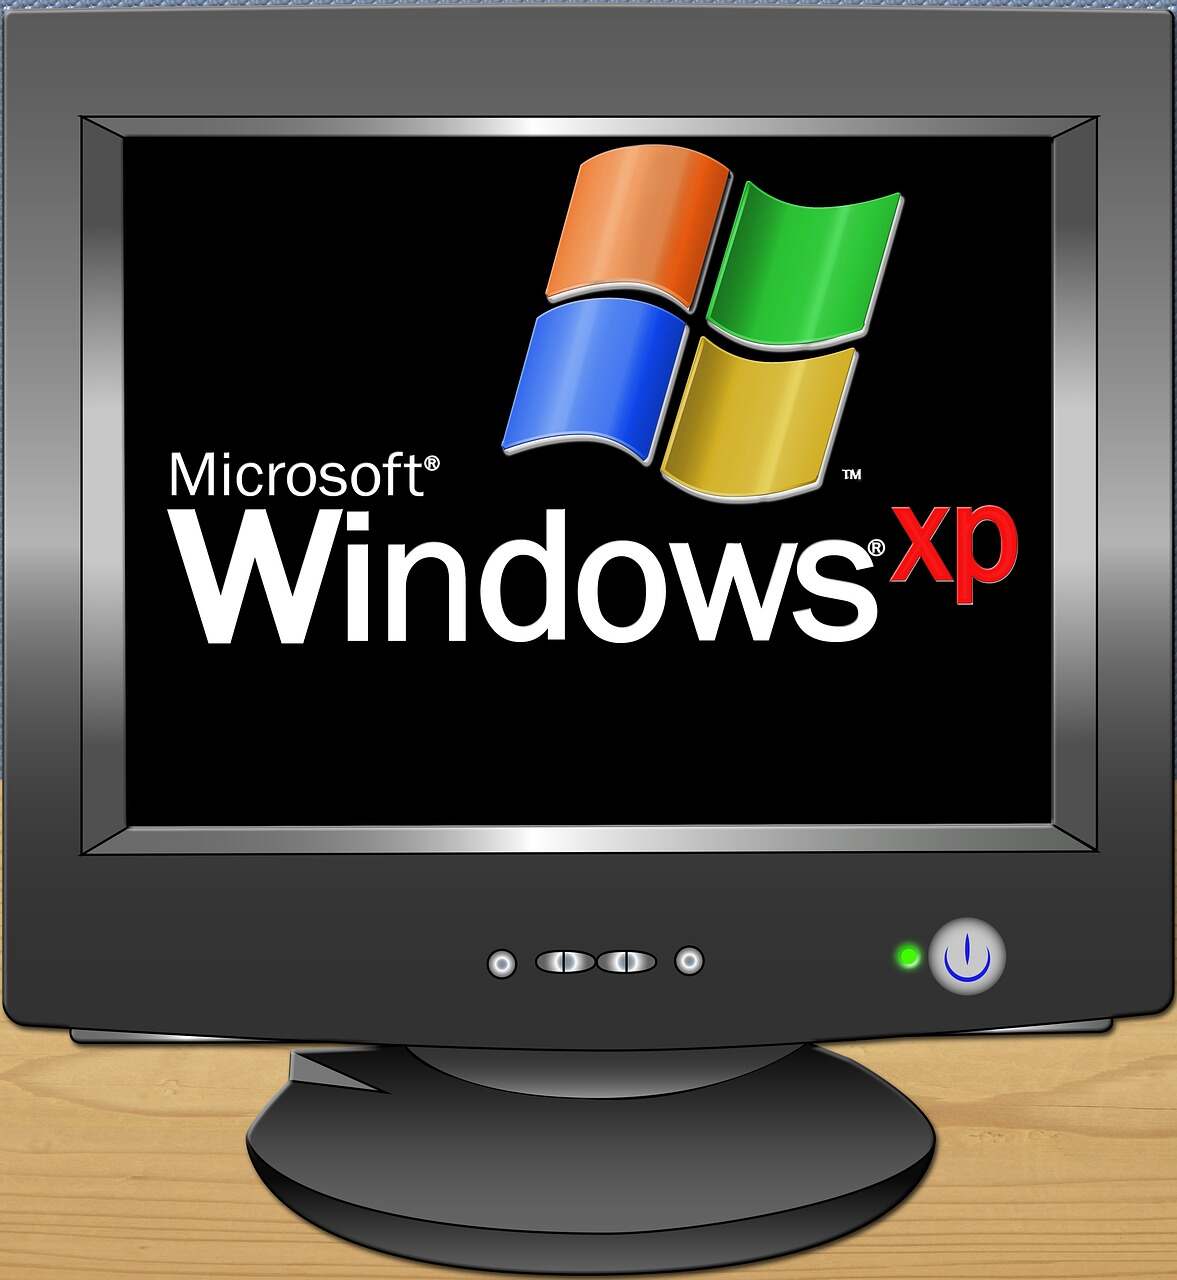 How Can I Make Windows XP Faster